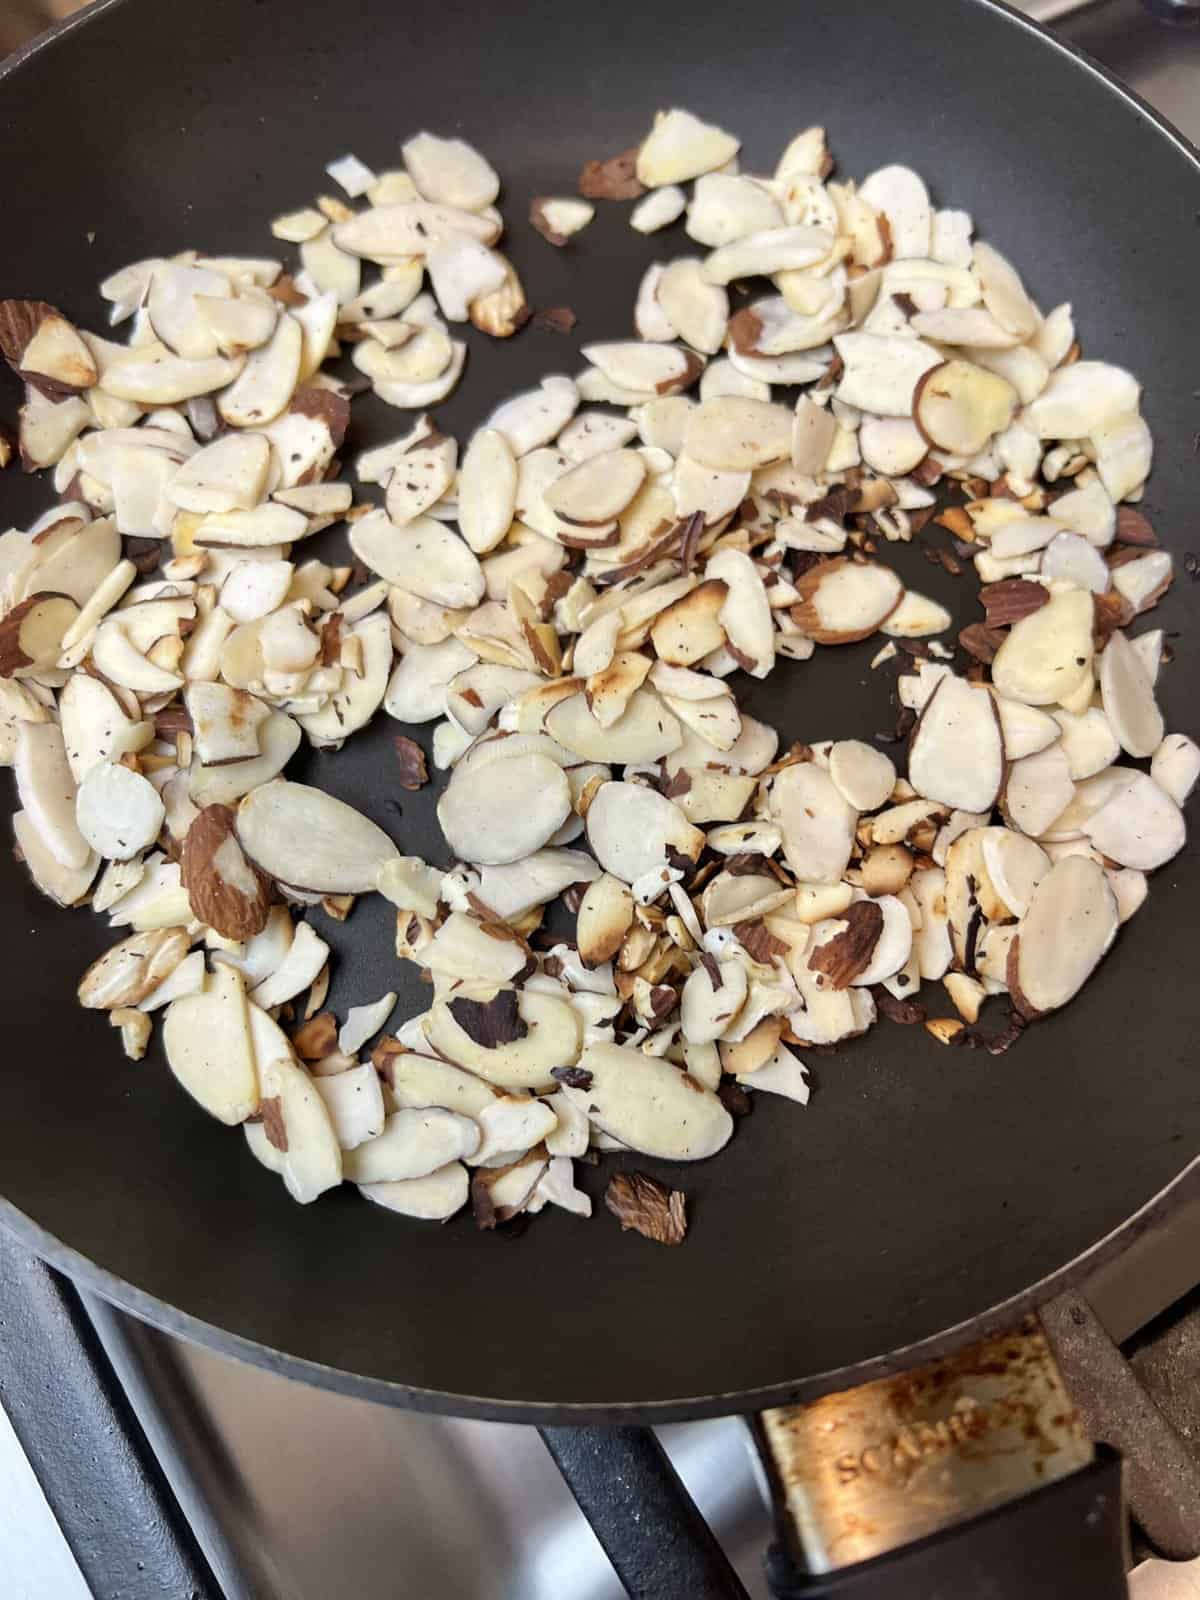 A black frying pan filled with almonds.